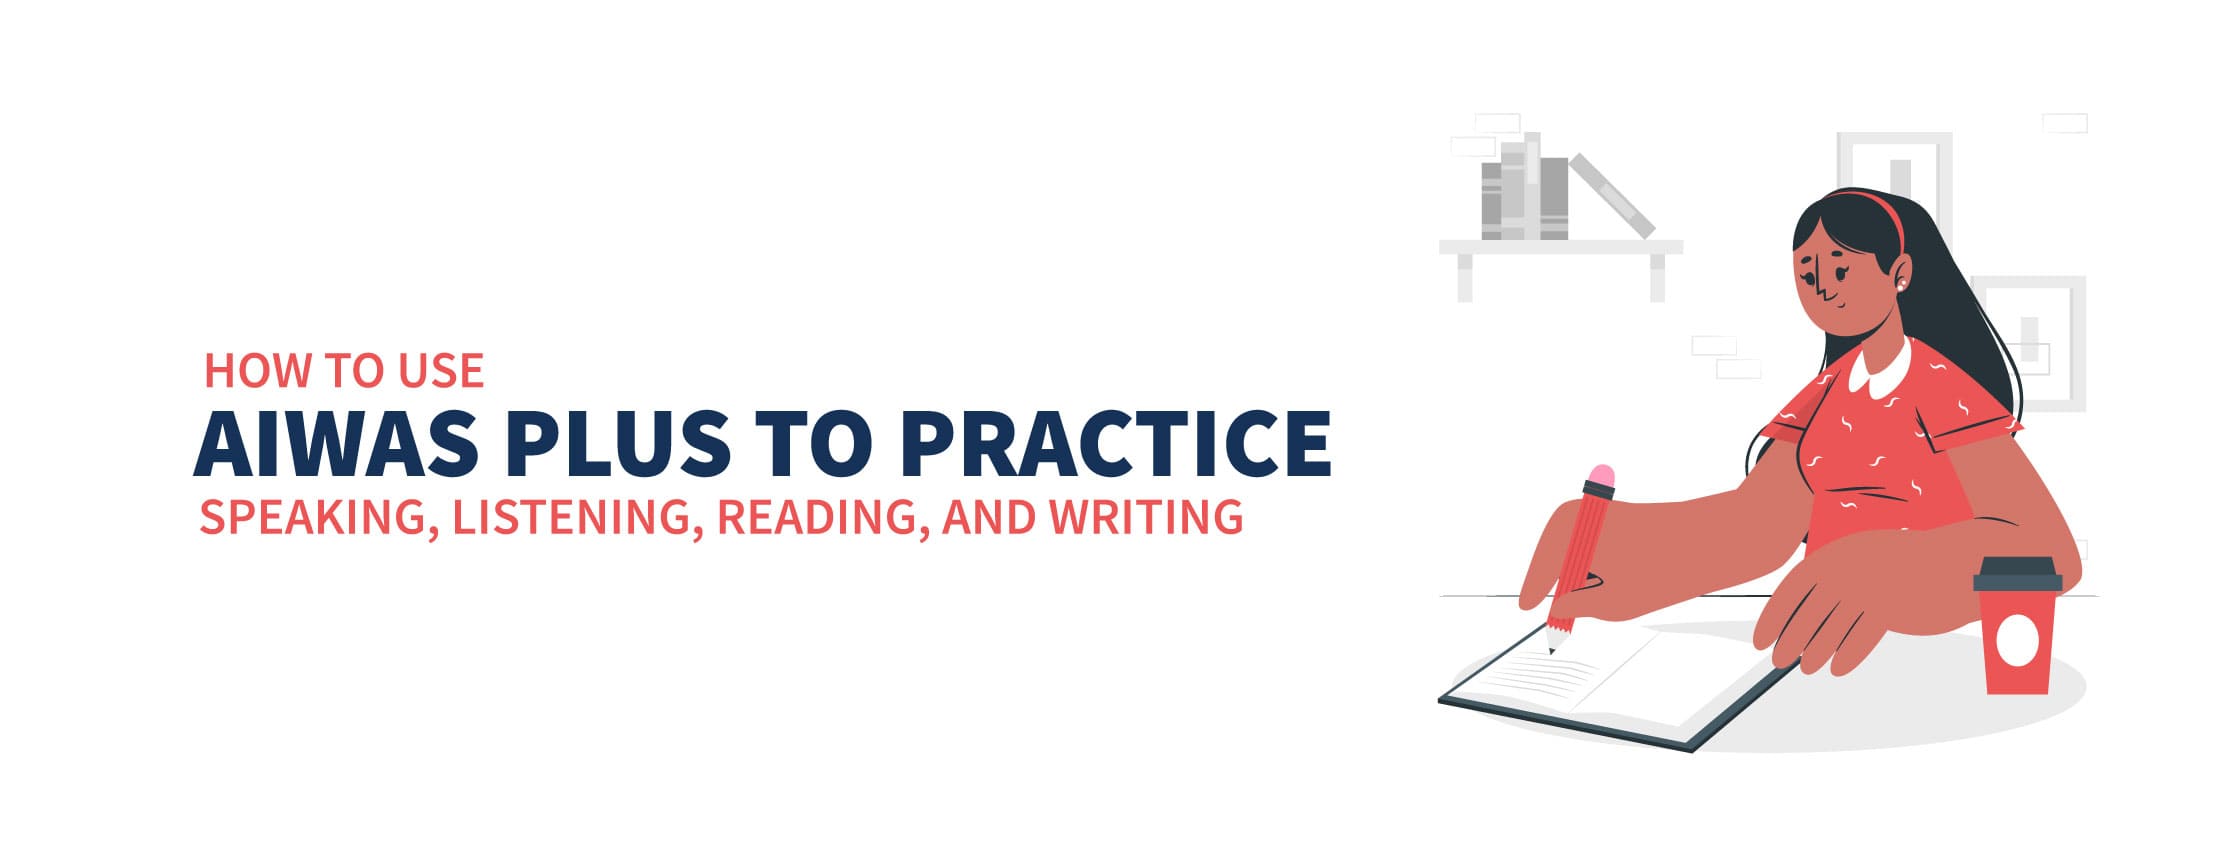 How to Use AIWAS Plus to Practice Speaking, Listening, Reading, and Writing